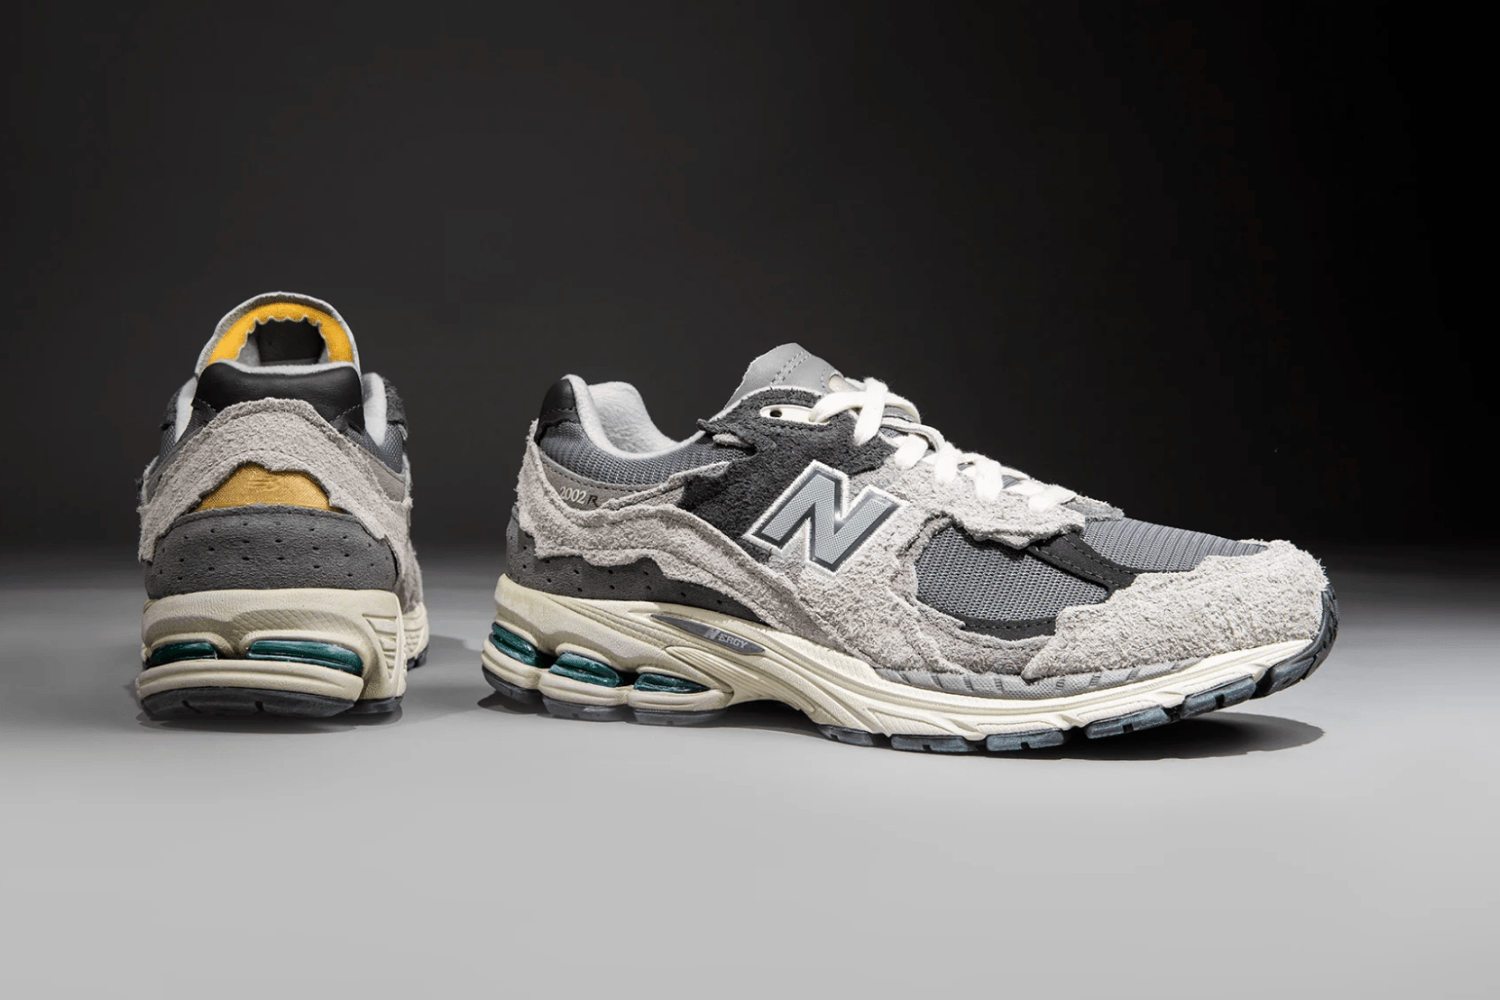 The New Balance 2002R 'Protection Pack - Rain Cloud' gets a restock at Footshop